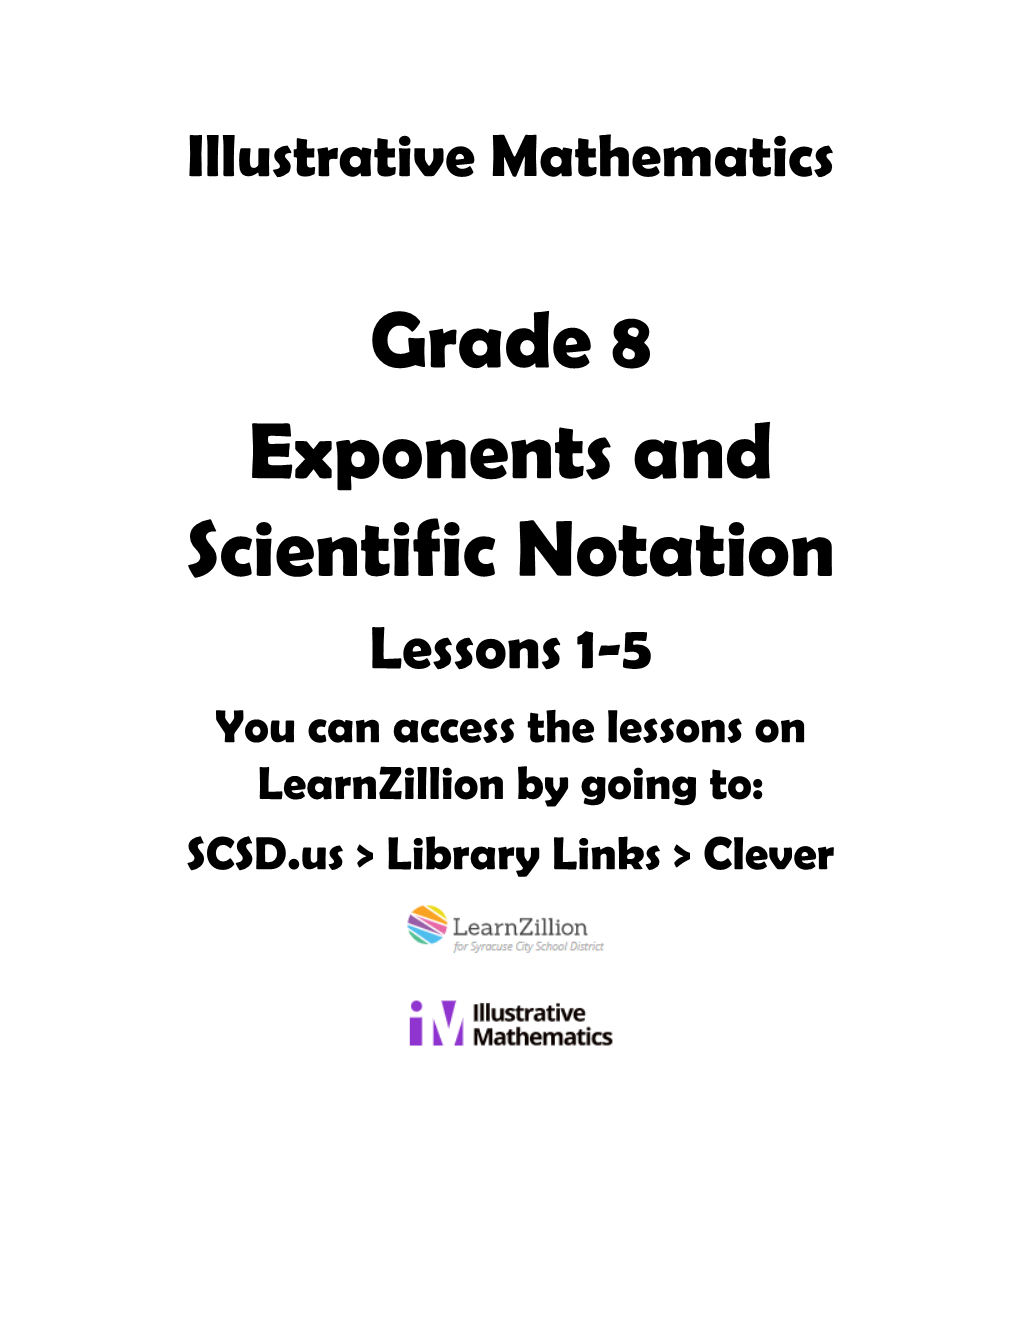 Grade 8 Exponents and Scientific Notation Lessons 1-5 You Can Access the Lessons on Learnzillion by Going To: SCSD.Us > Library Links > Clever